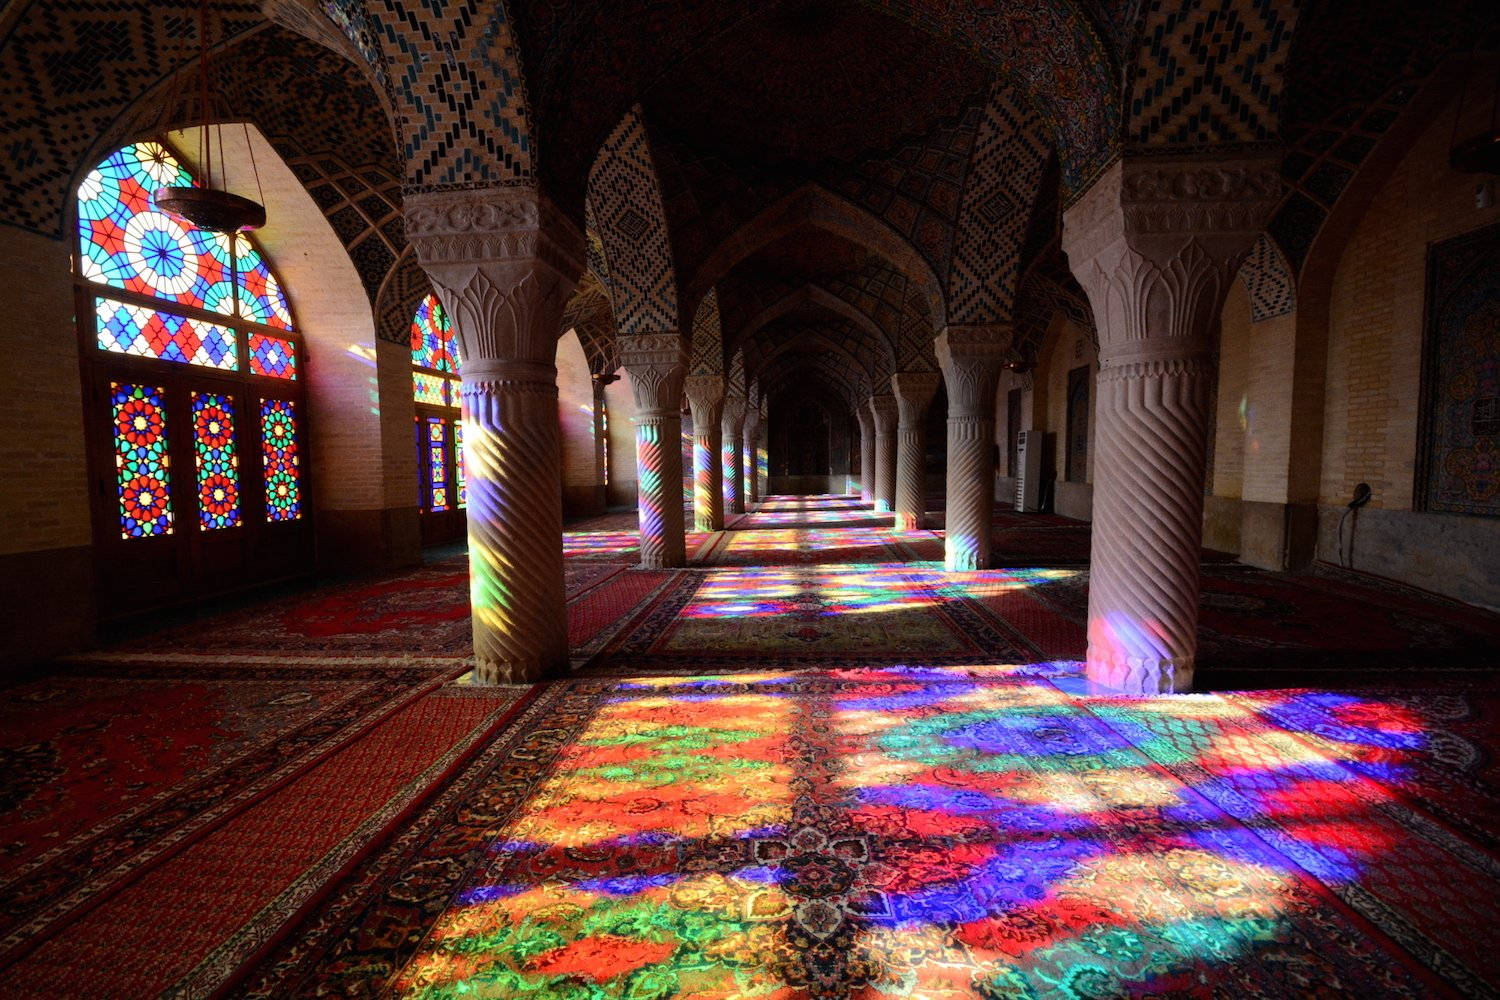 Vibrant And Intricate Mosaic Floors Of An Iranian Mosque